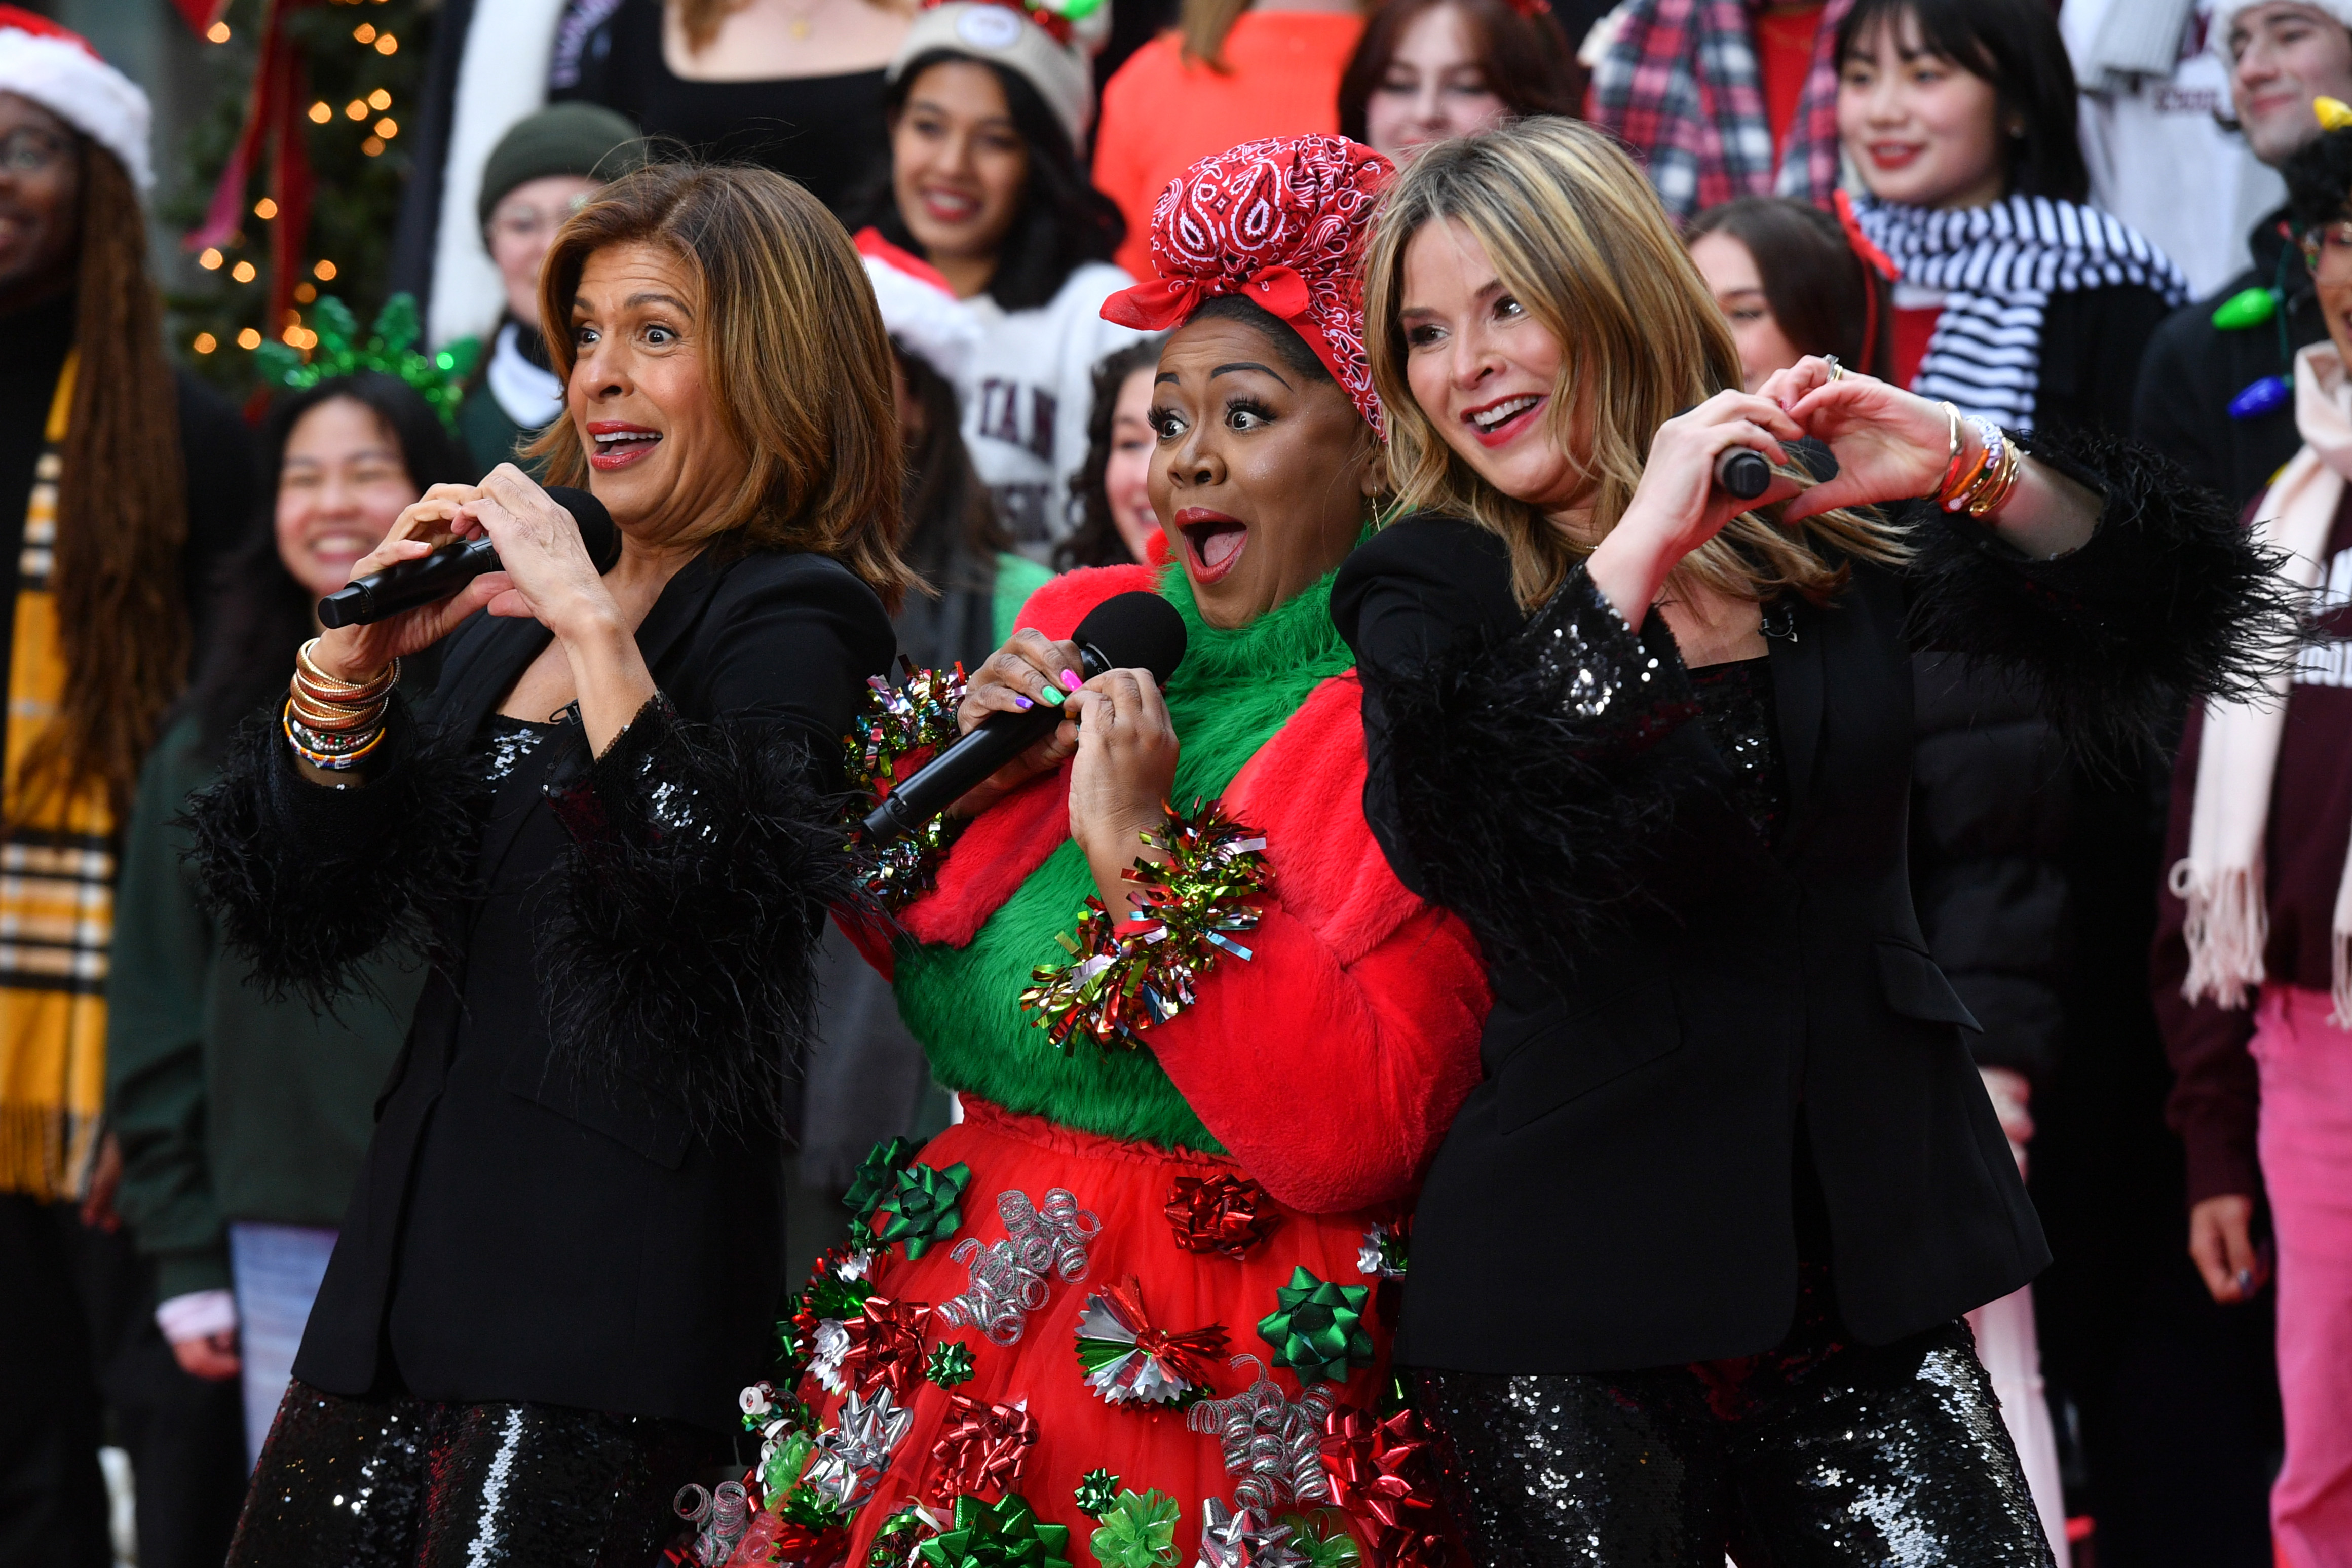 Last week, Hoda and Jenna Bush Hager were slammed for 'lip-syncing' during a live Christmas performance